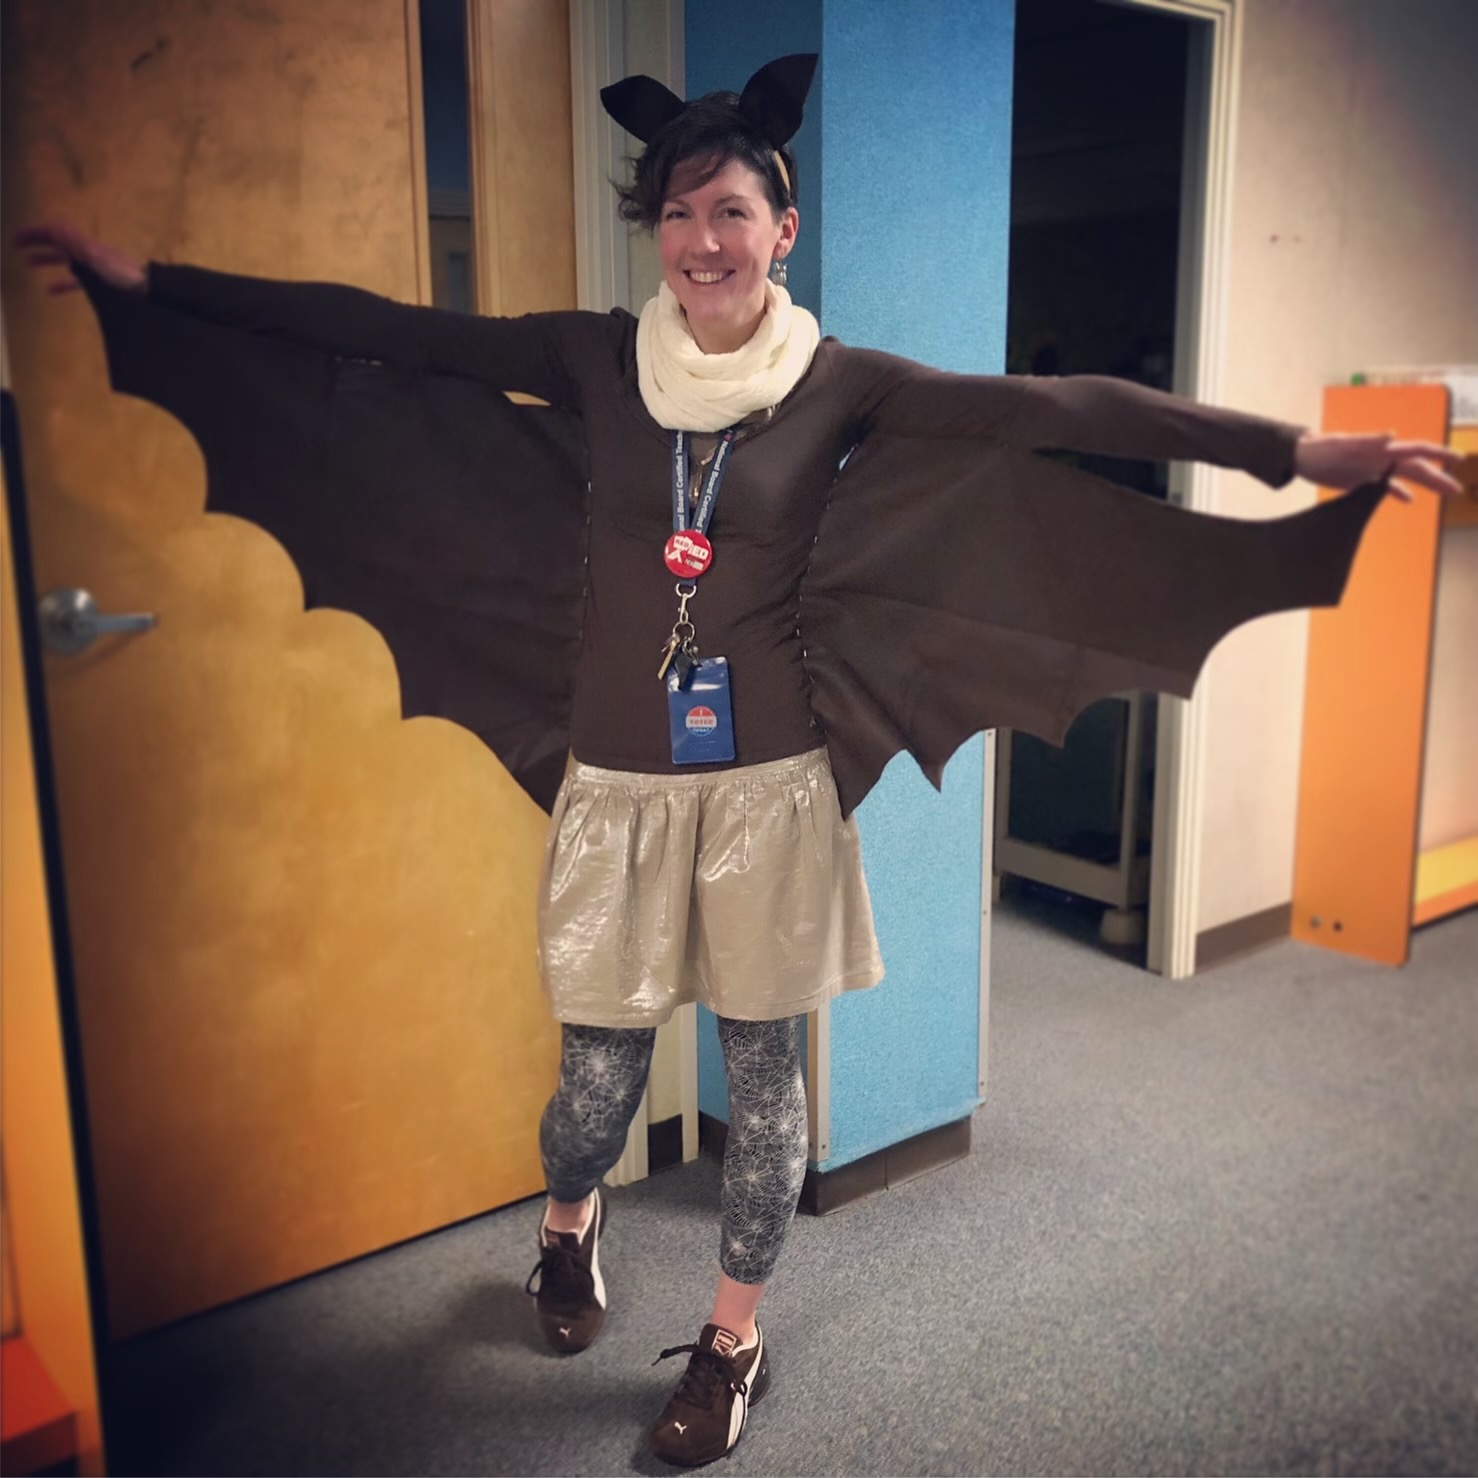 Kristin Halverson, a tall woman dressed in a costume with bat wings.